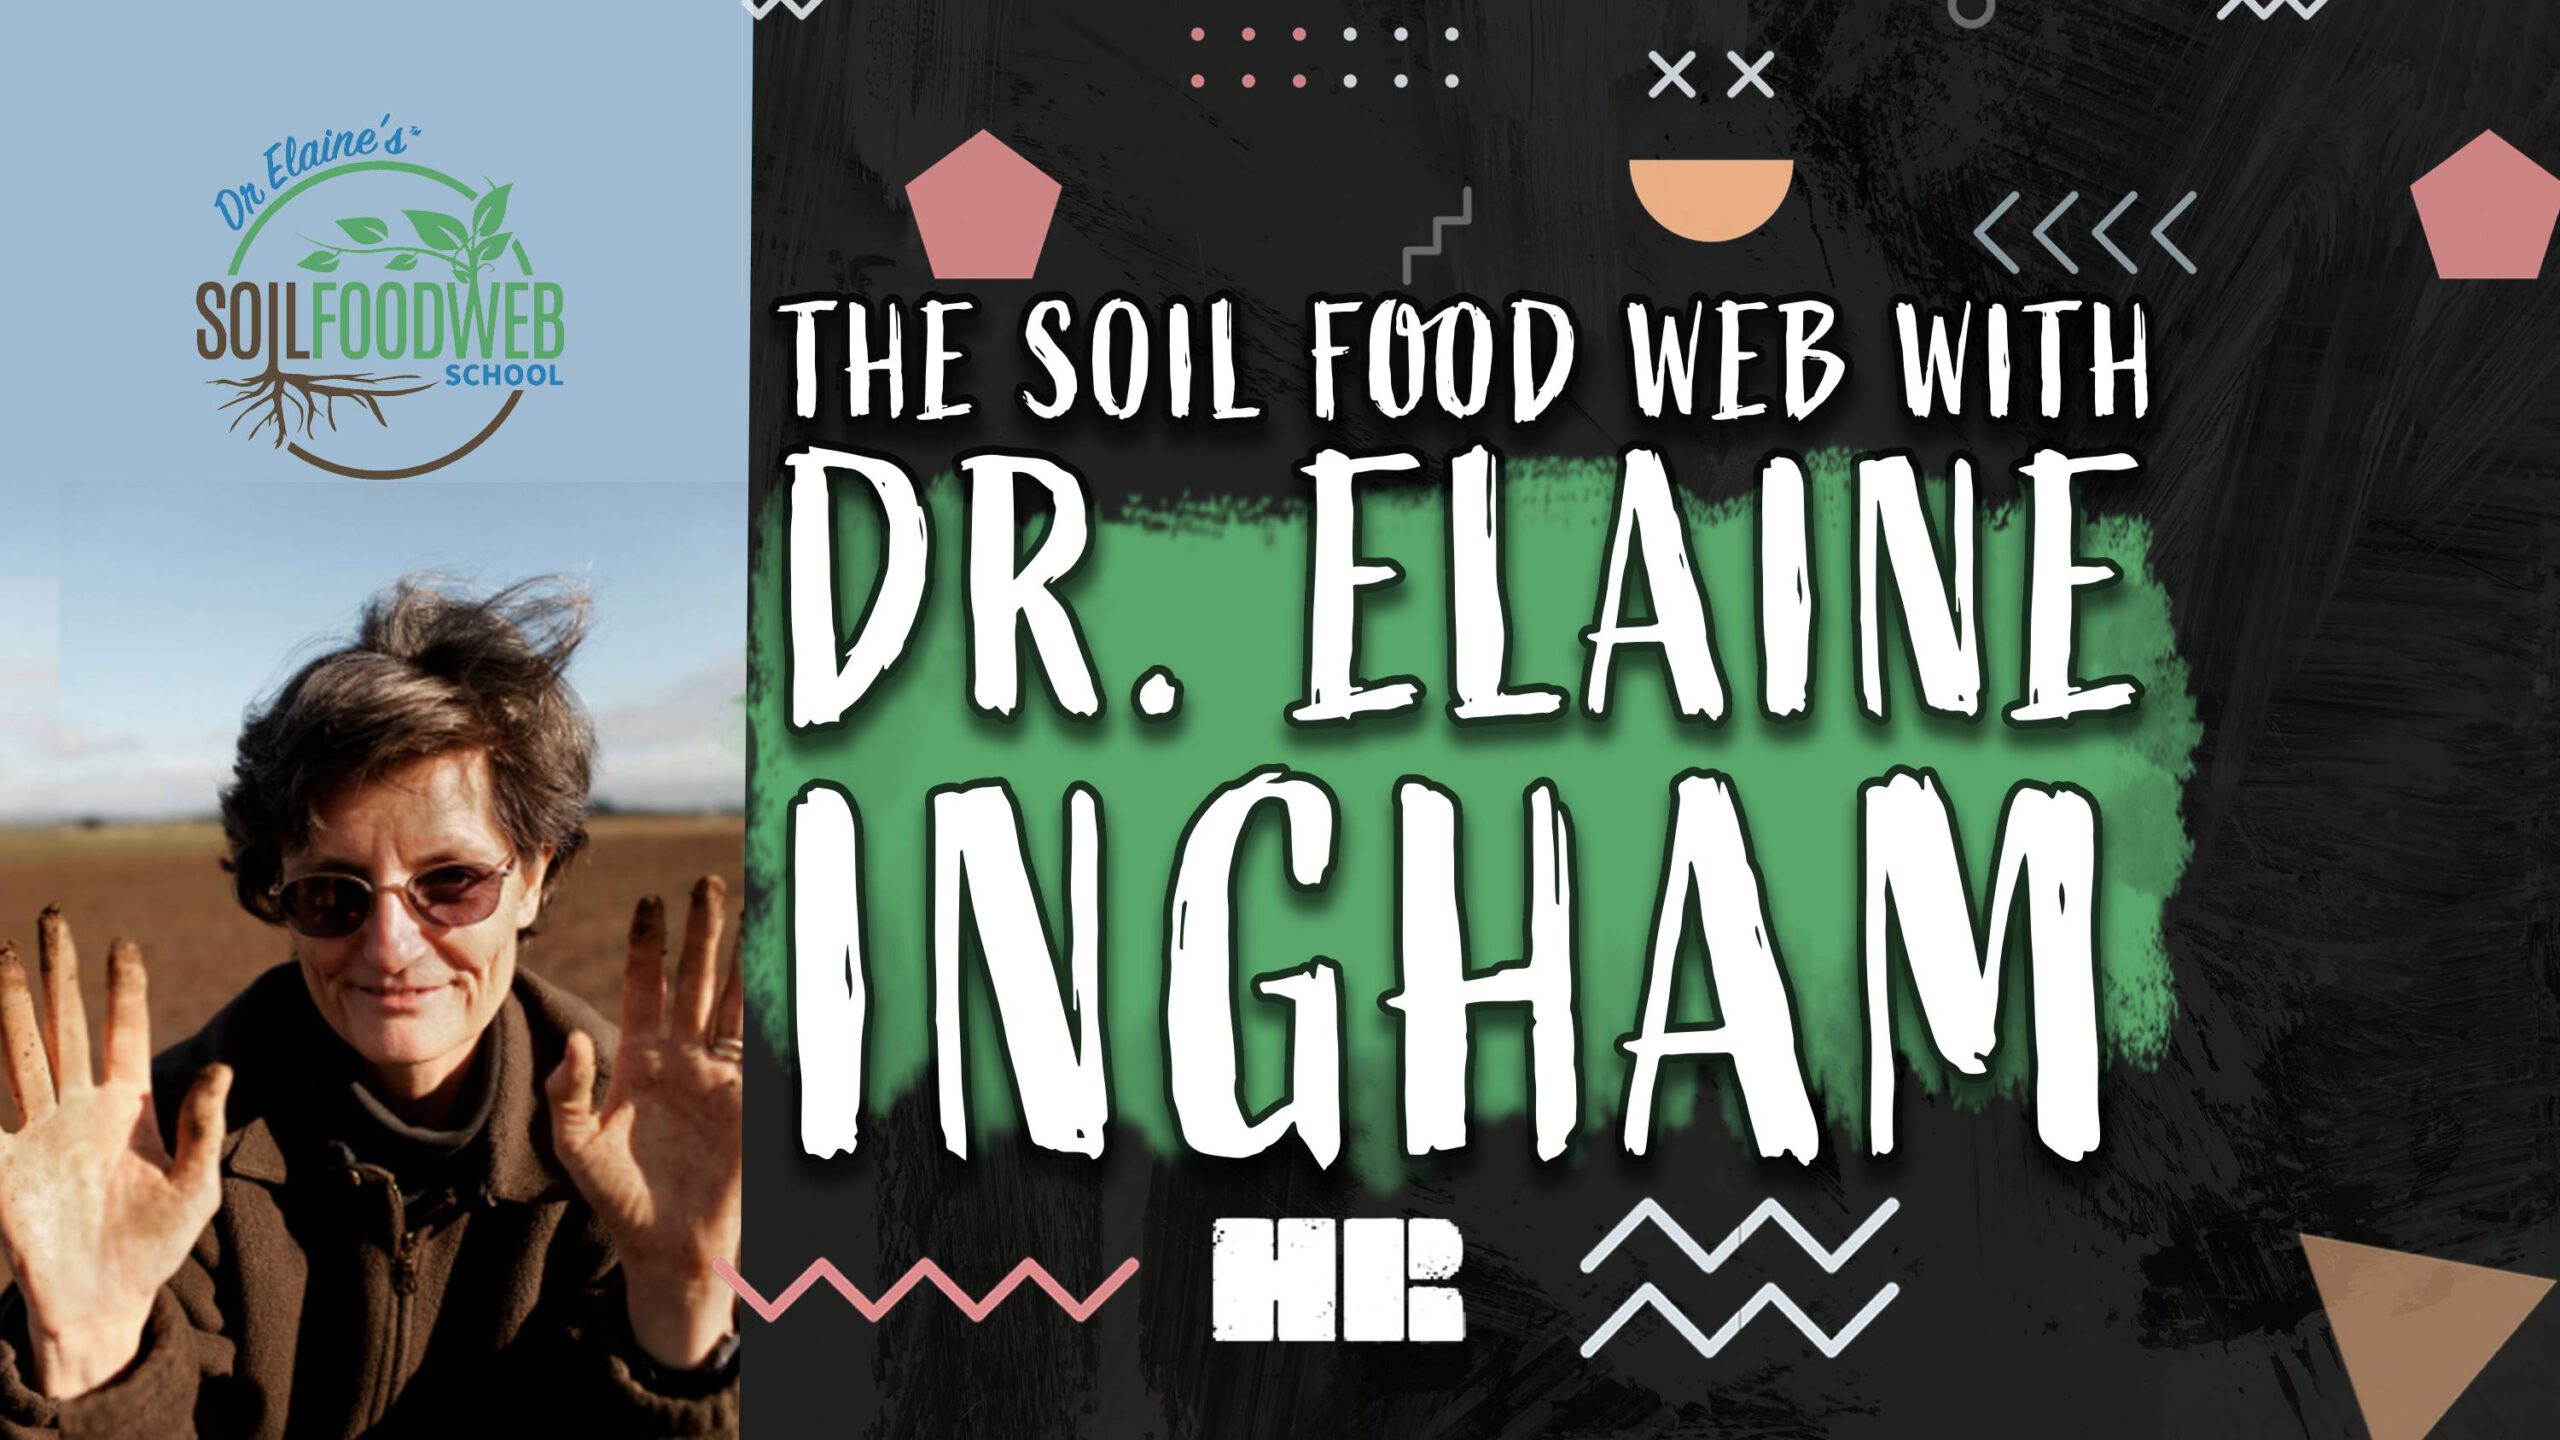 THE SOIL FOOD WEB WITH DR ELAINE